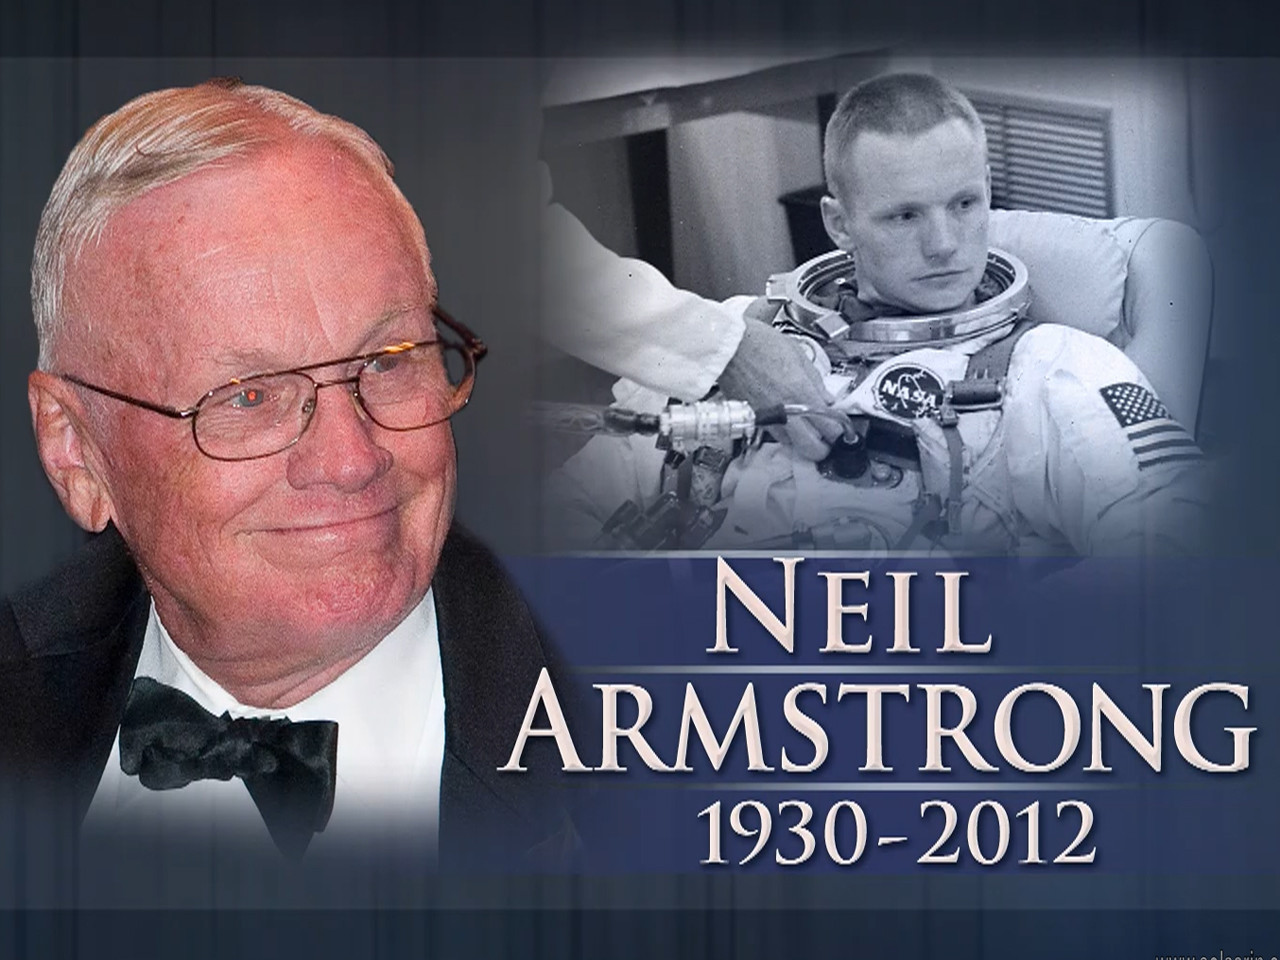 why did neil armstrong die